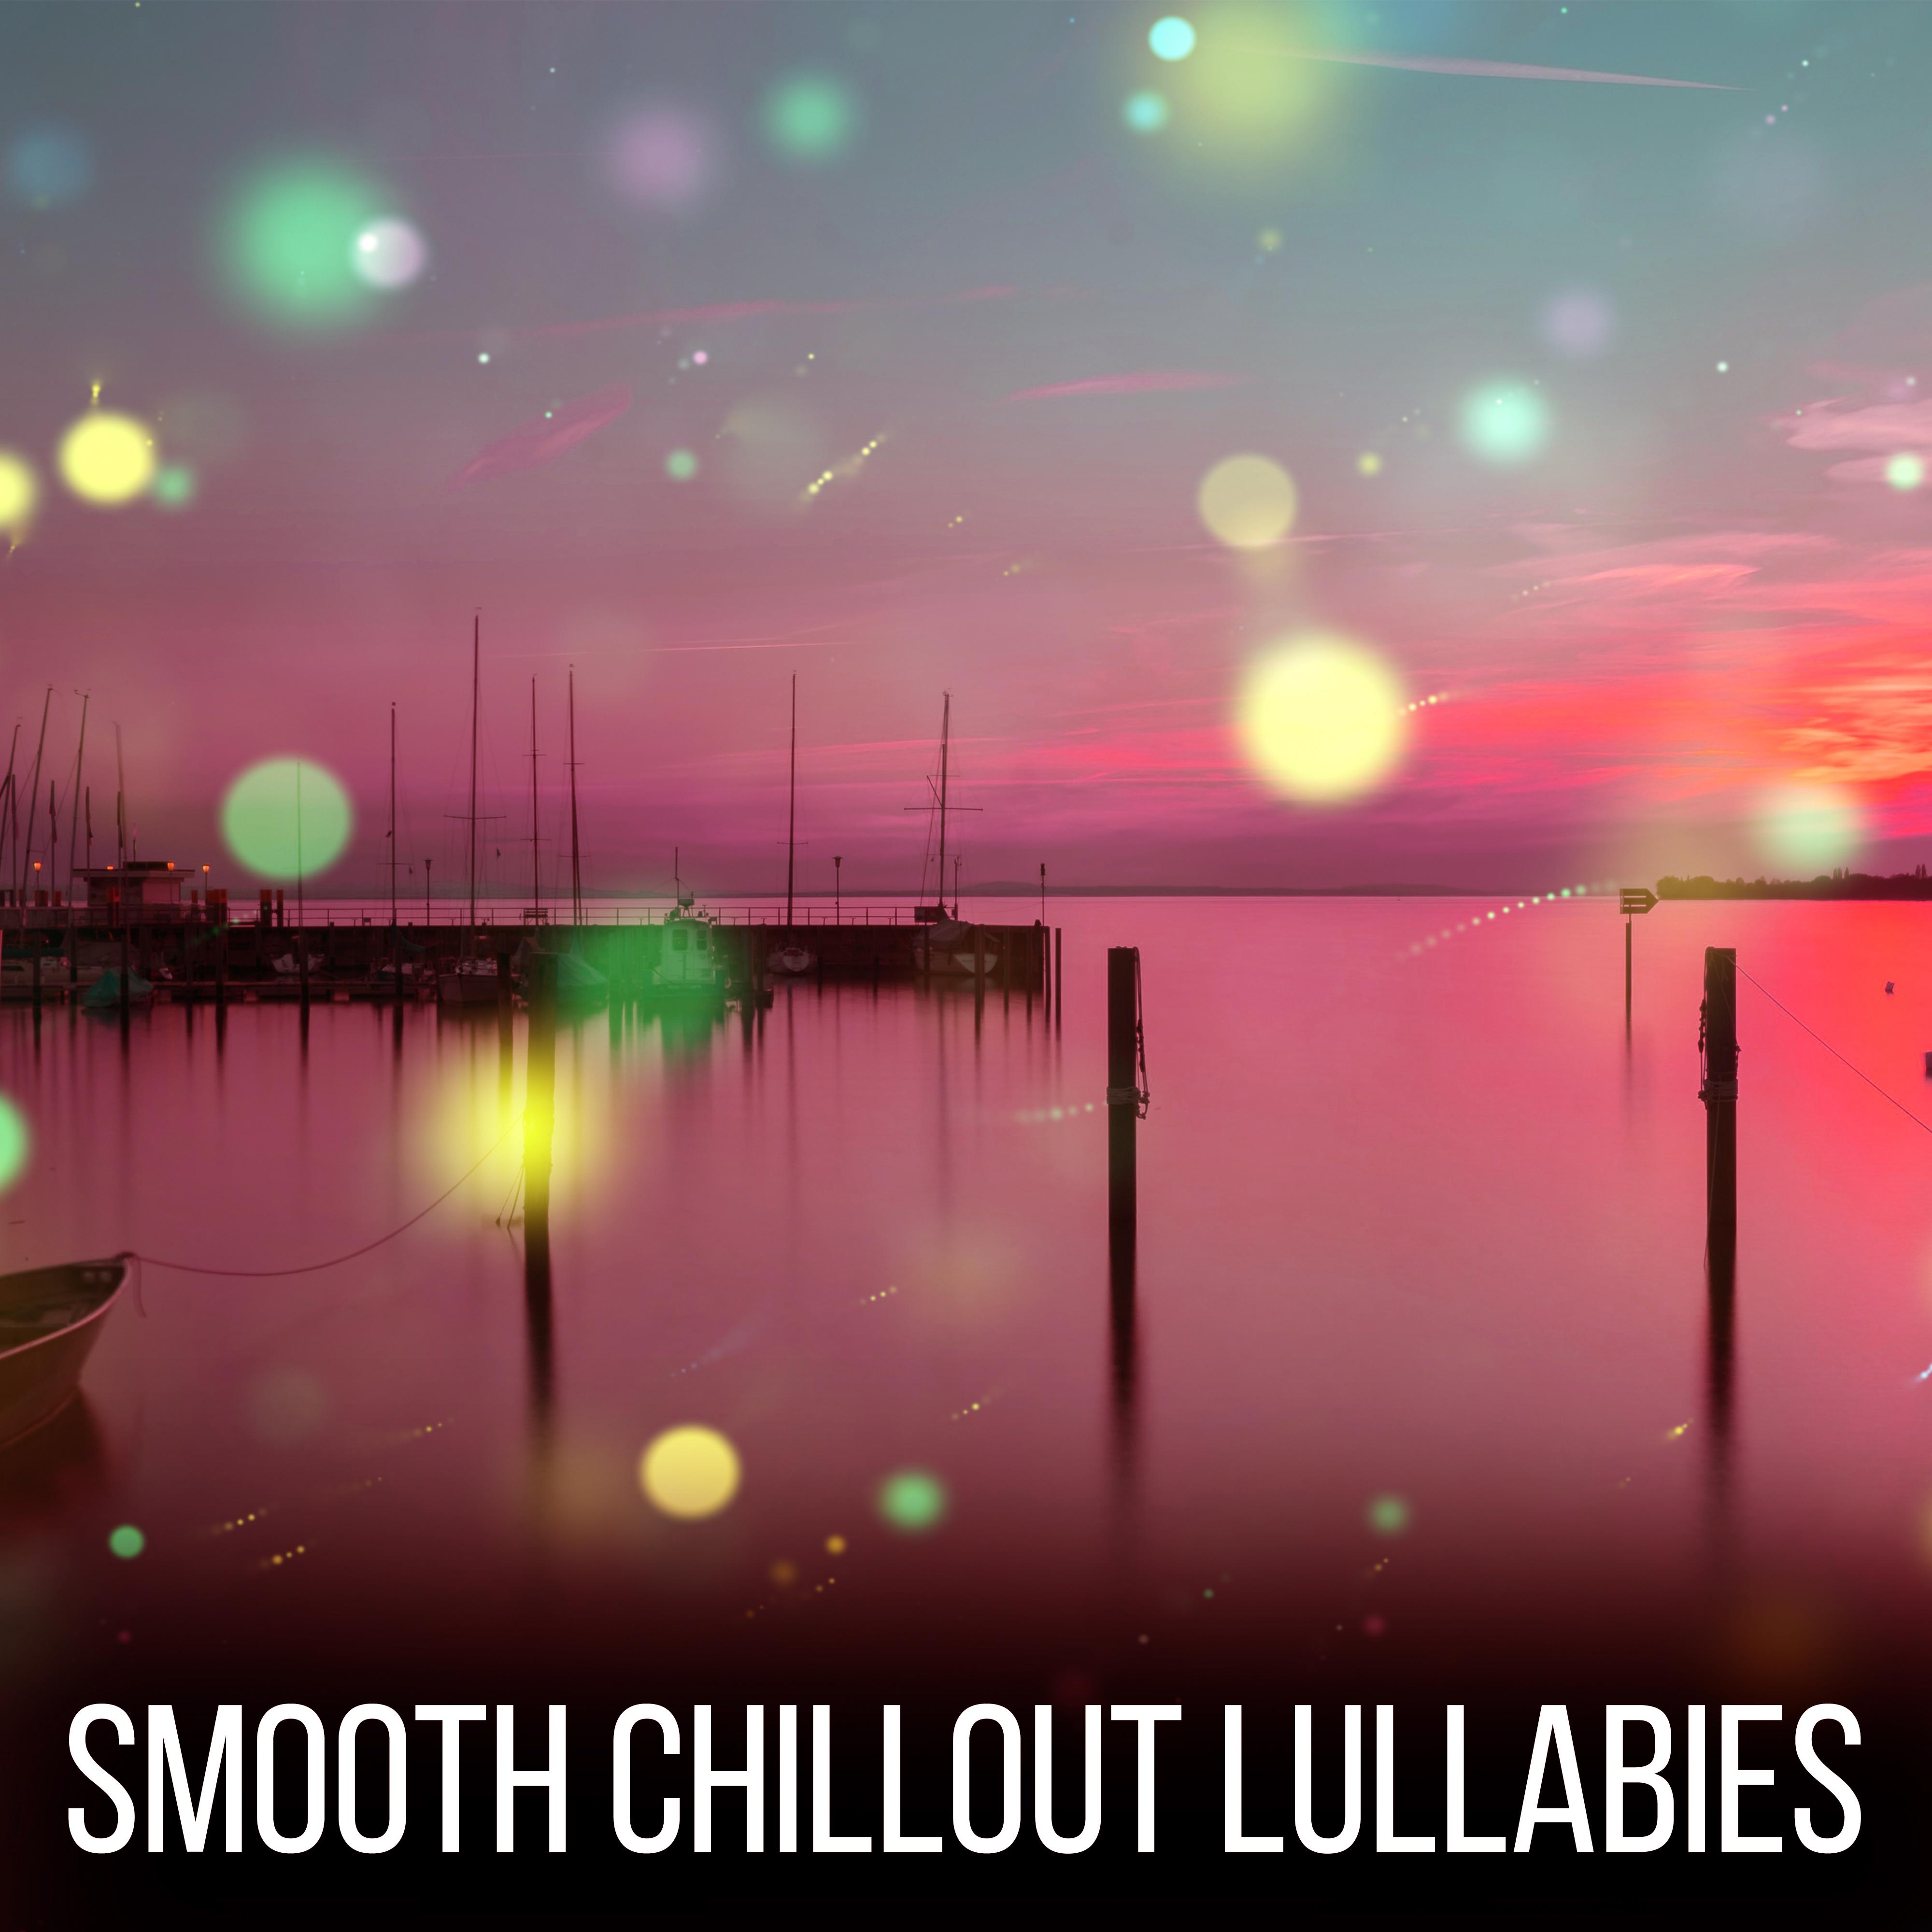 Smooth Chillout Lullabies – Soft Chill Out Music, Relax, Chill Out Lounge, Rest at Home